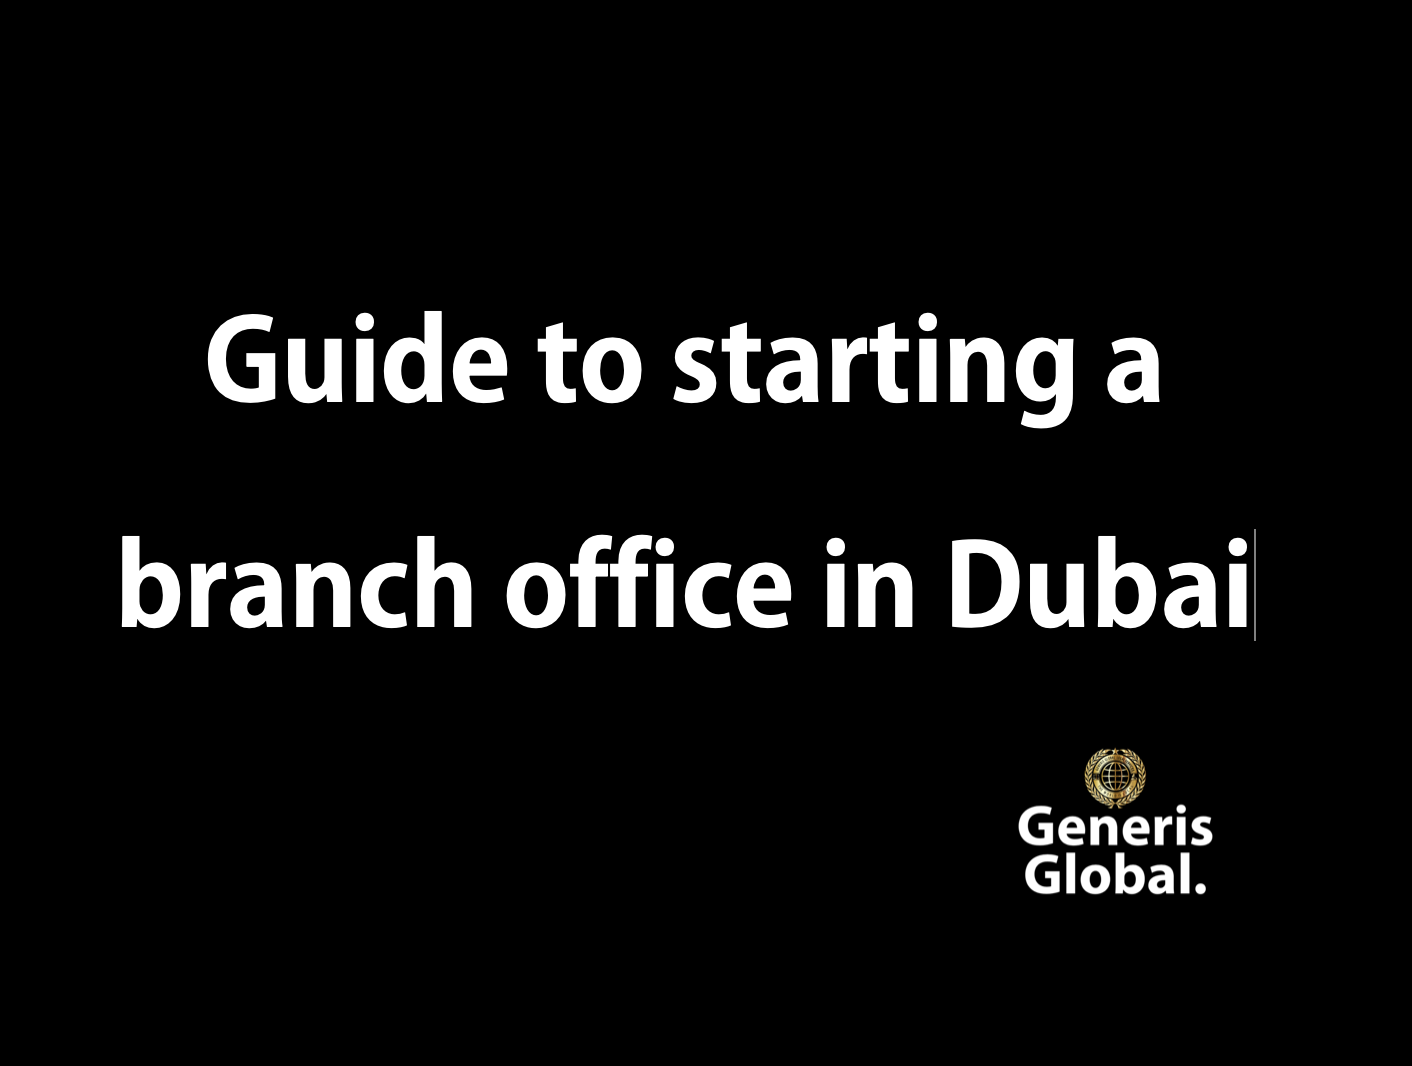 Guide to starting a branch office in Dubai